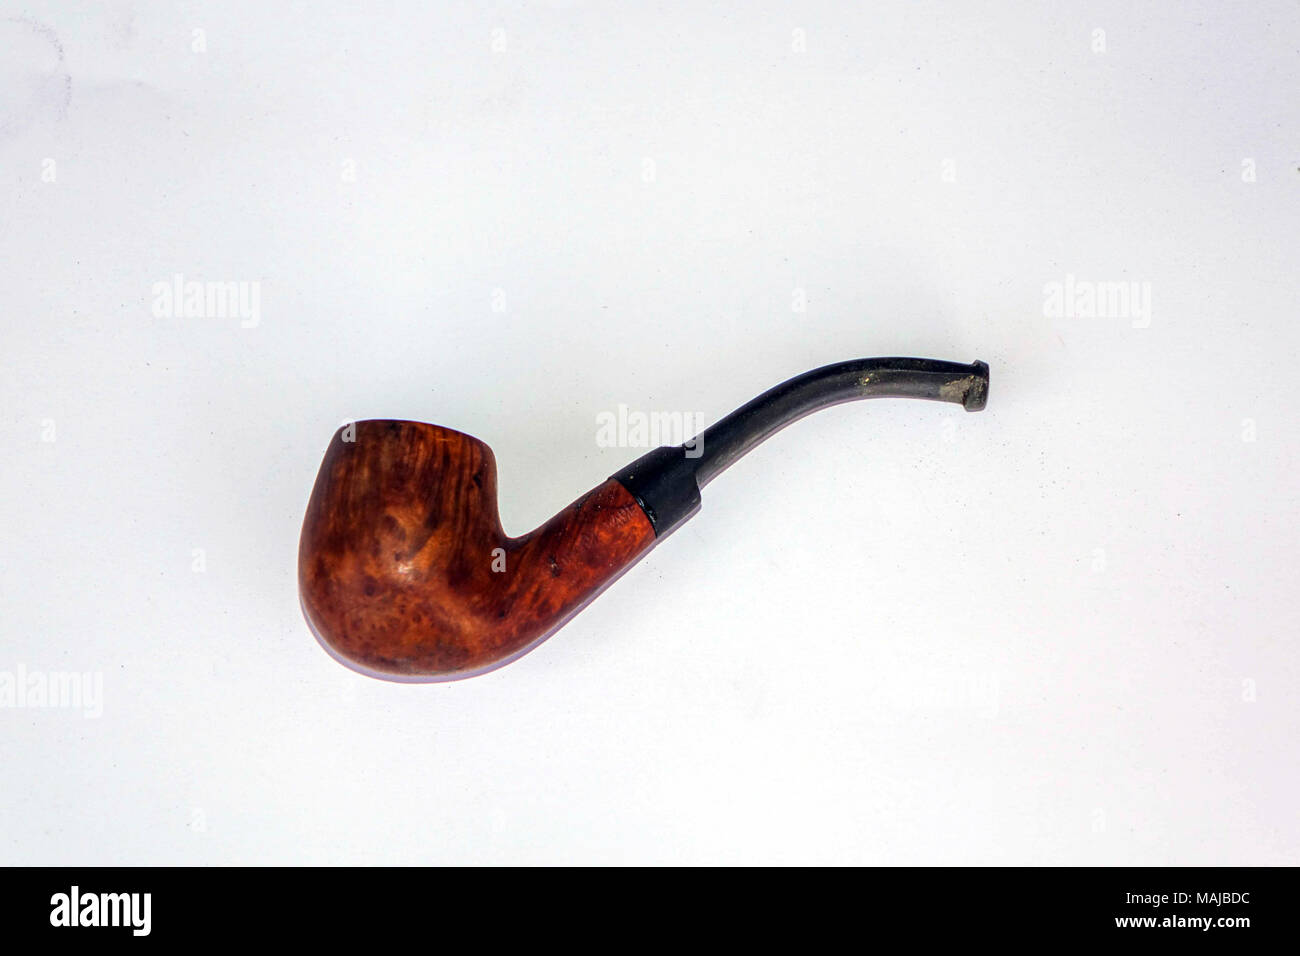 Used wooden smoking pipe against white background, in Turkey Stock Photo